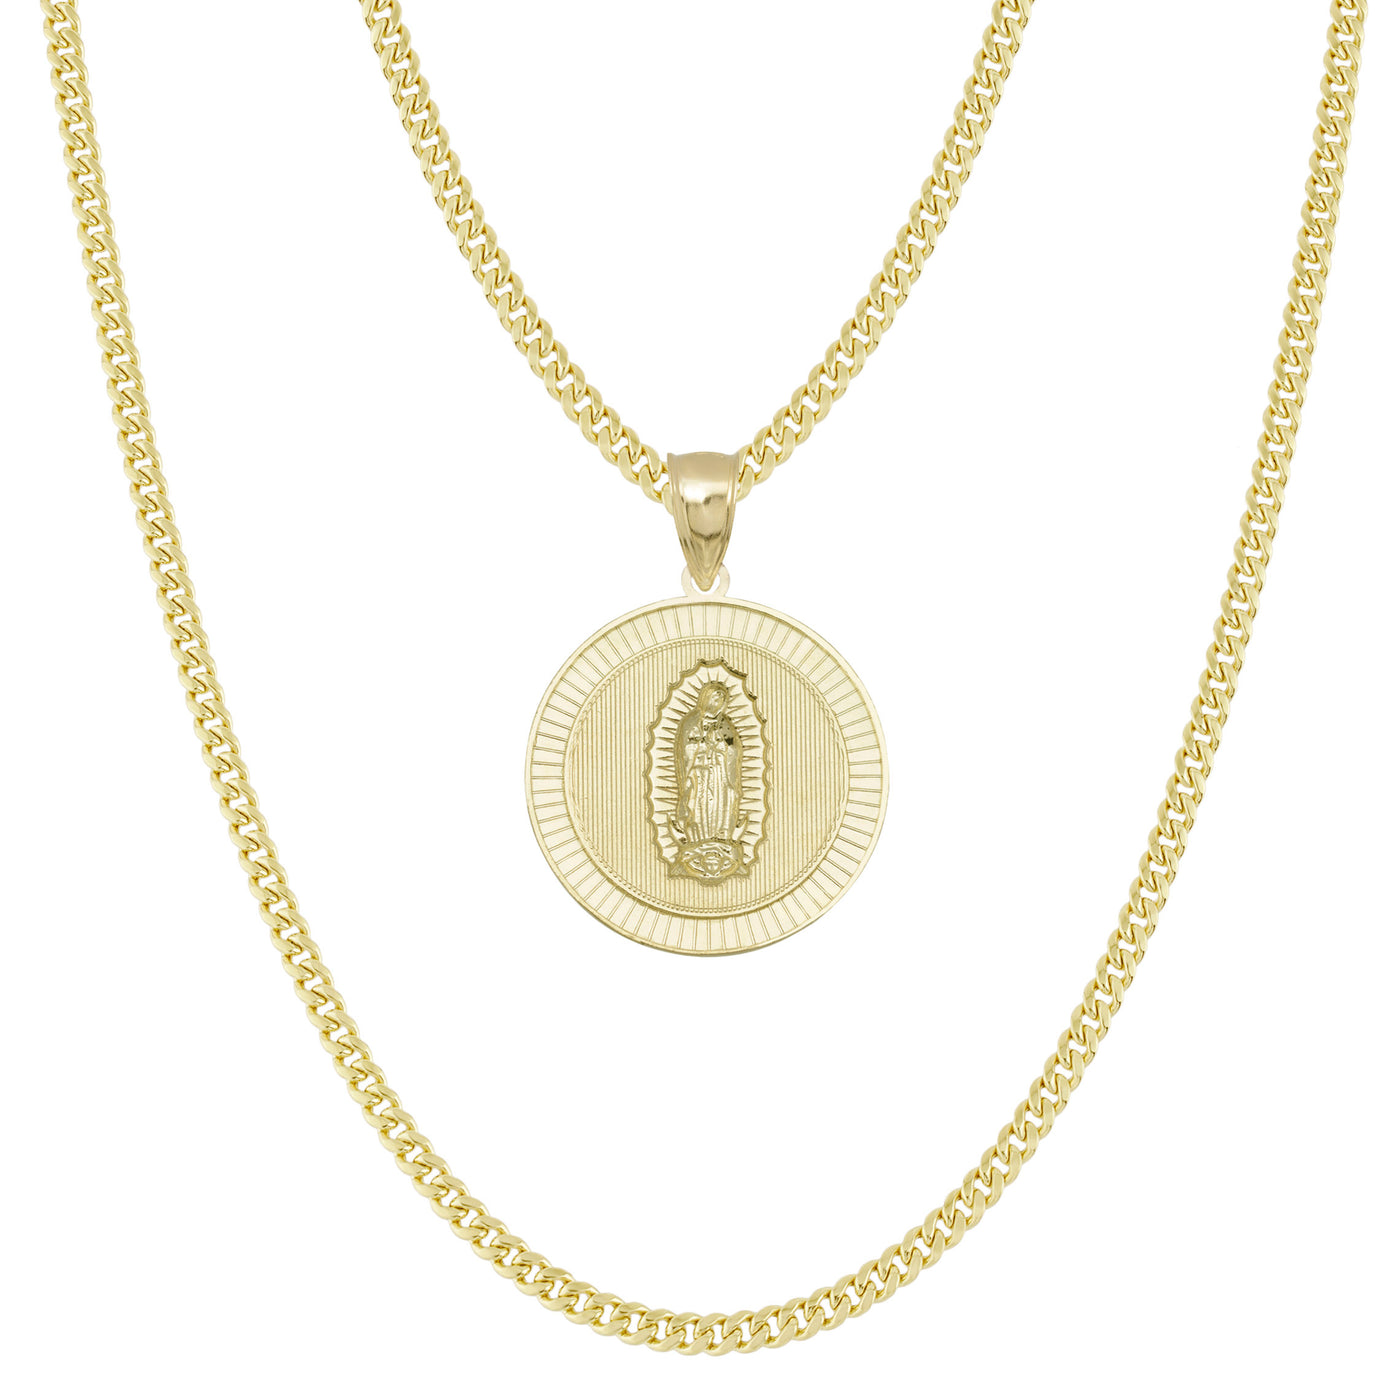 Lady Guadalupe Virgin Mary Medallion Pendant & Chain Necklace Set 10K Yellow Gold